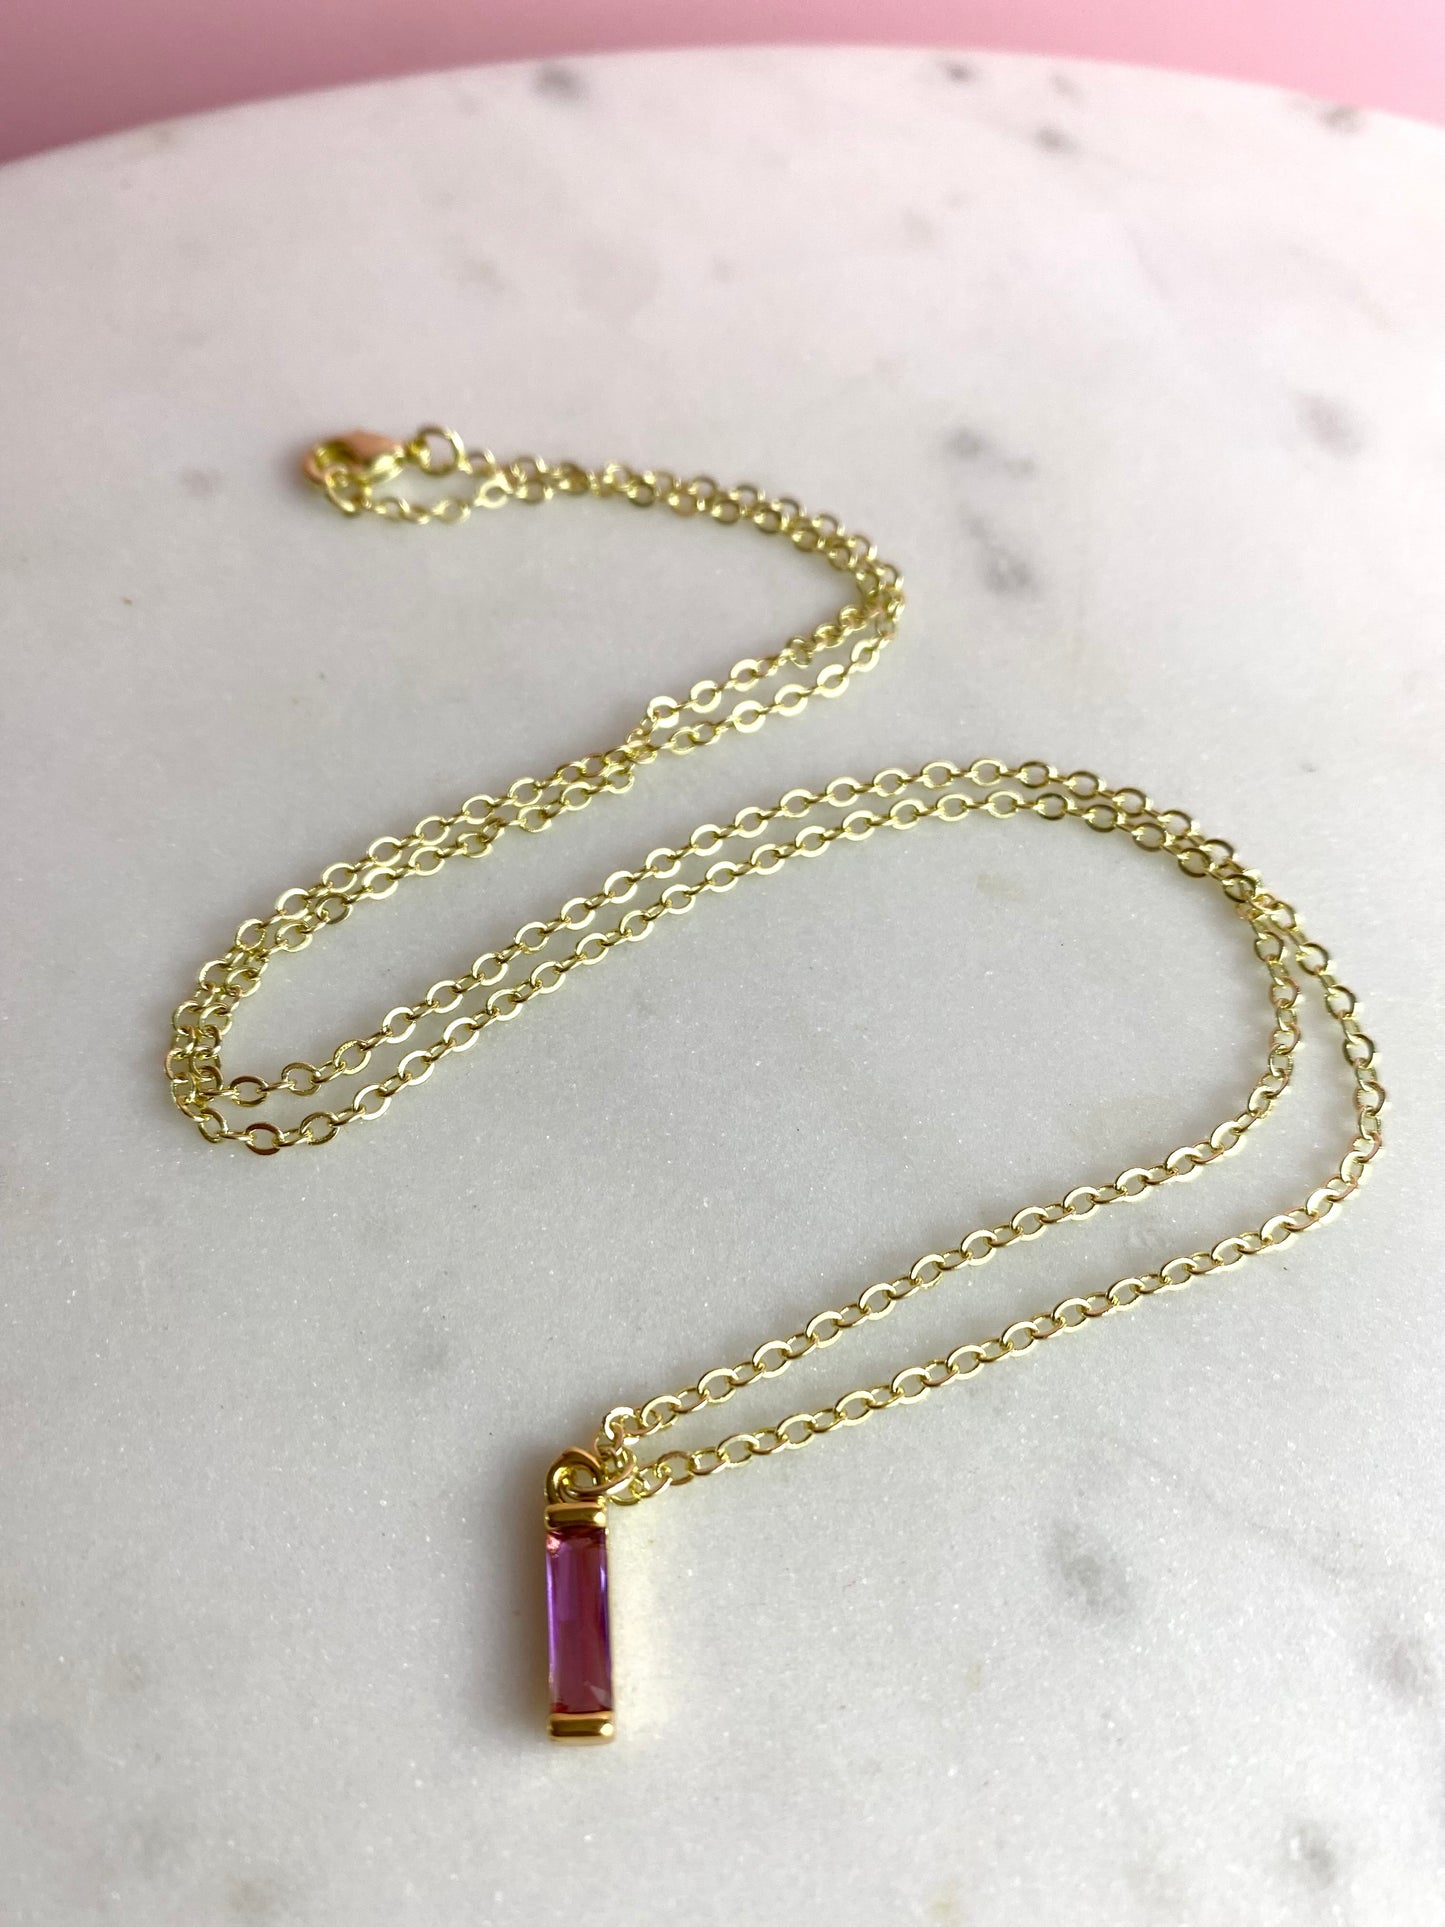 Dainty Gold-Plated Amethyst Cubic Zirconia Bar Necklace | Handmade Jewelry